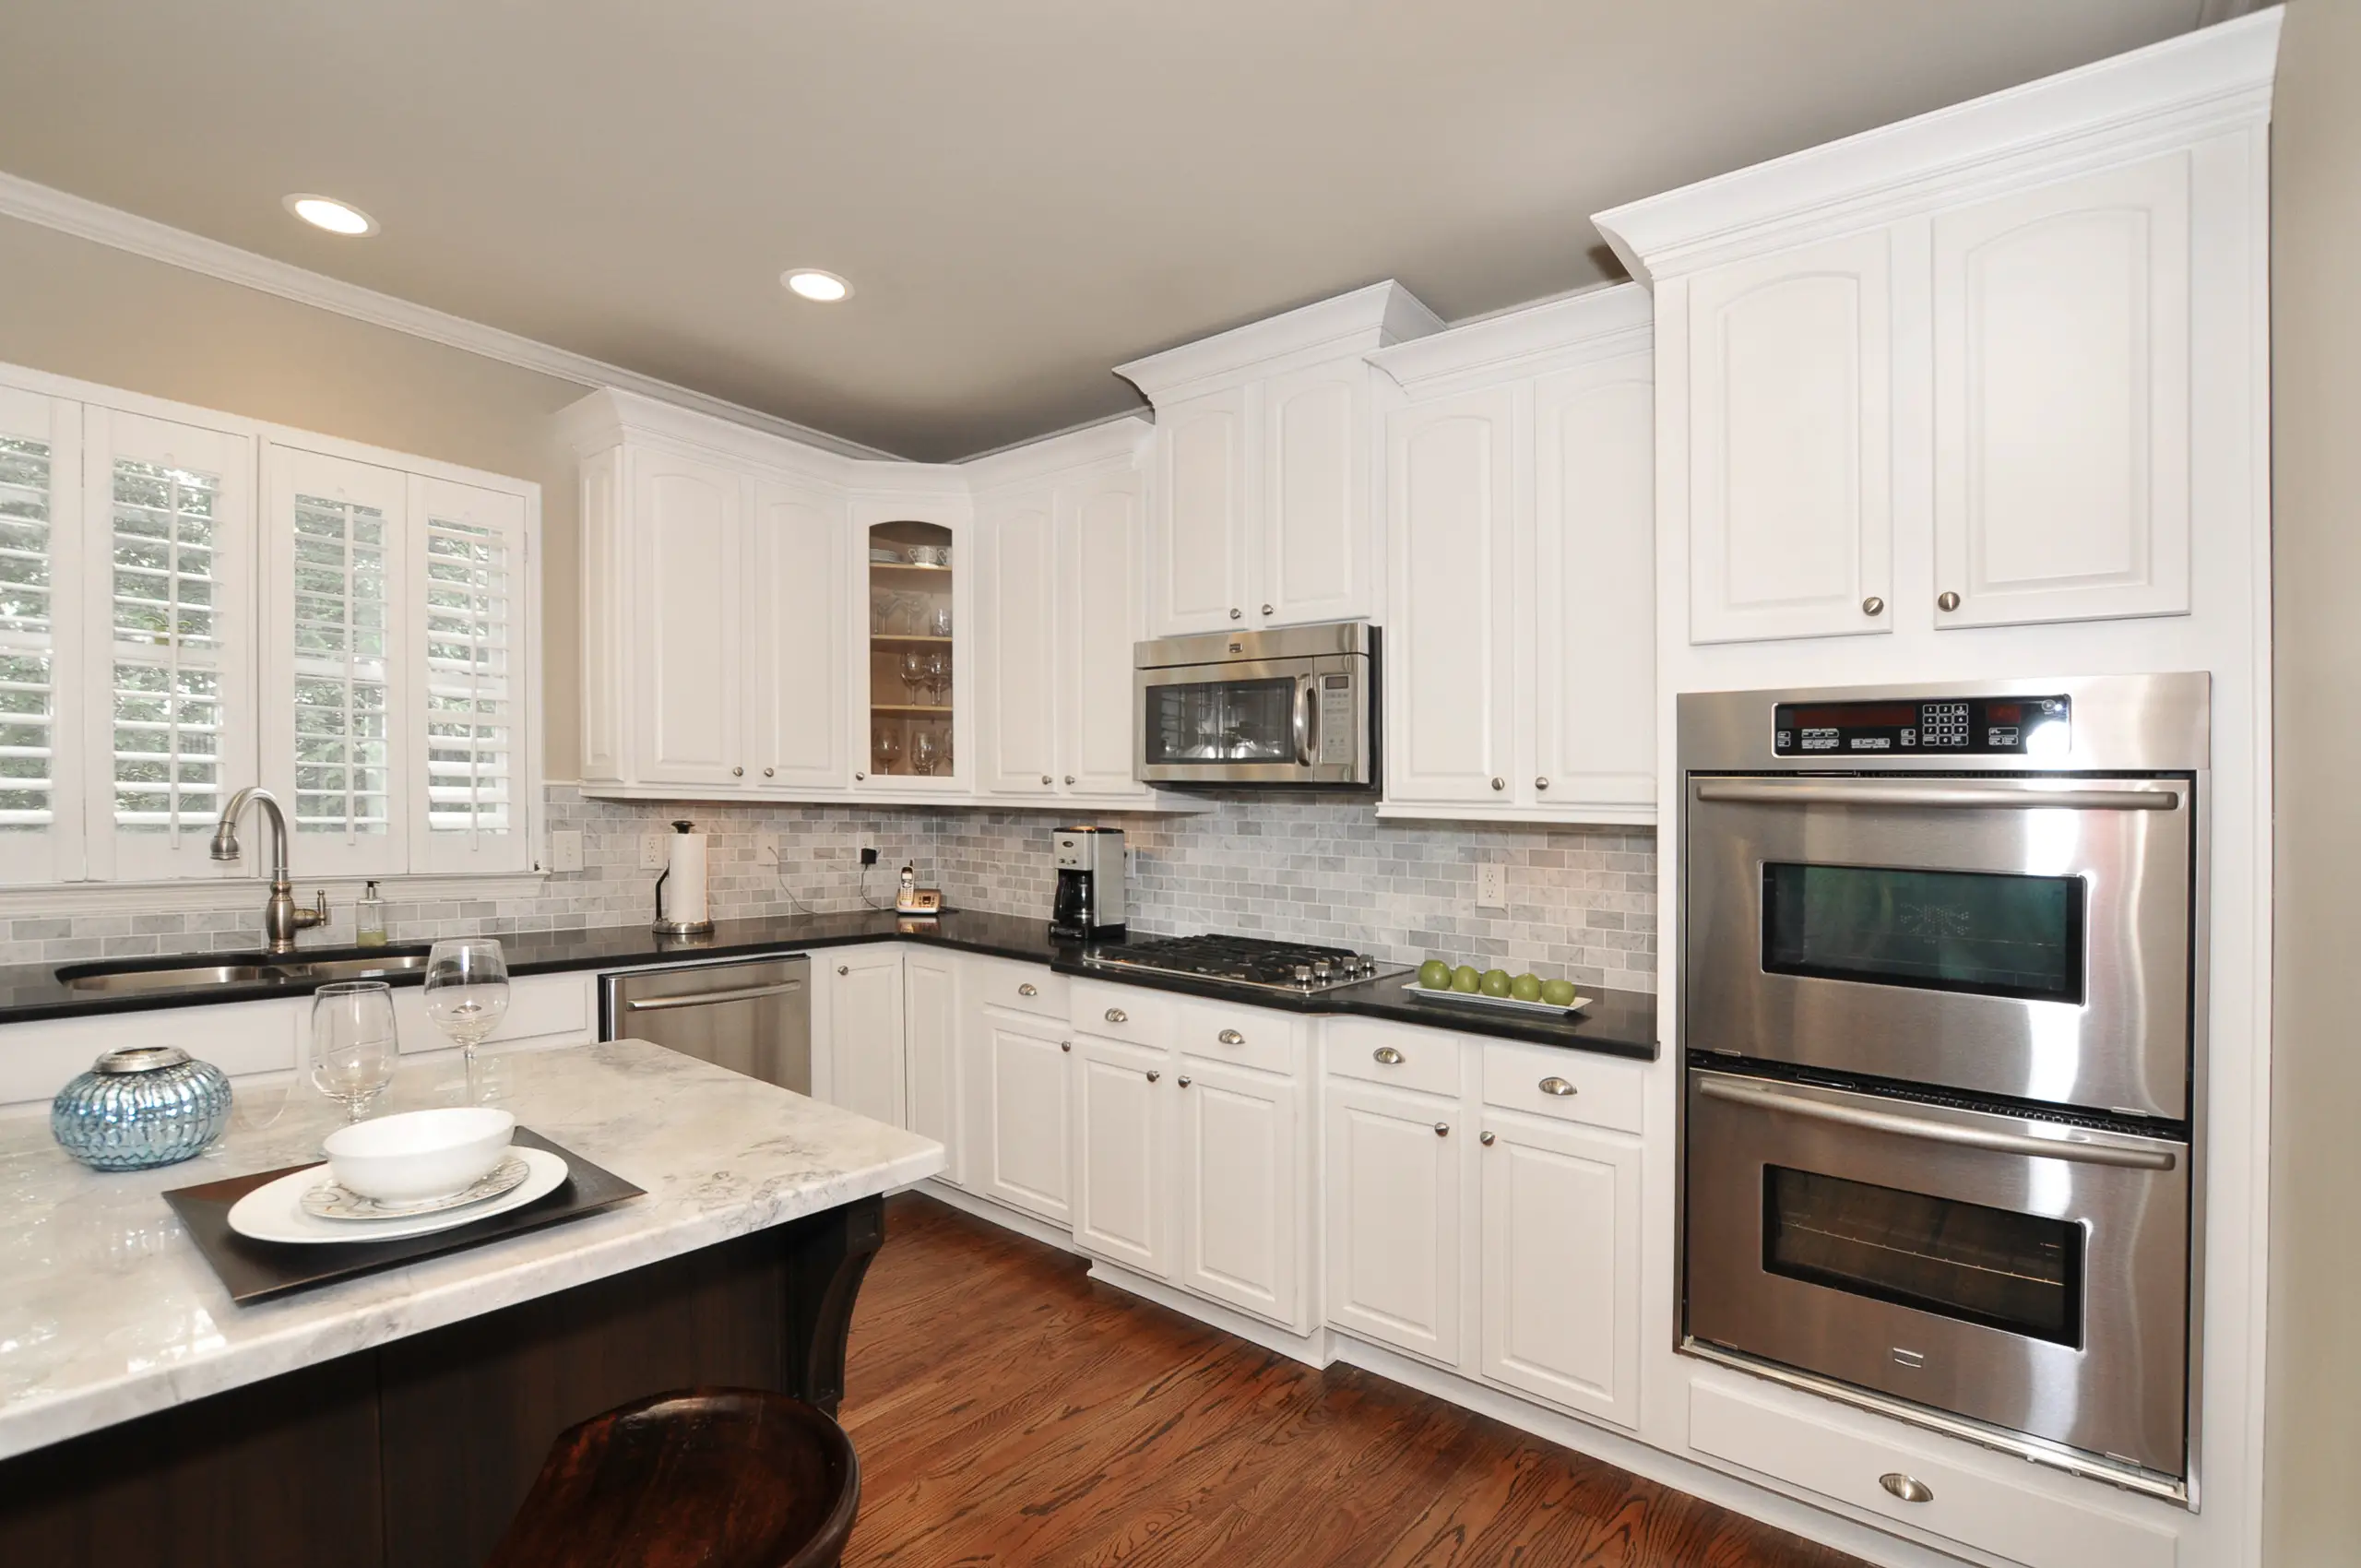 Off-White Kitchen cabinets With Crown Molding on Top